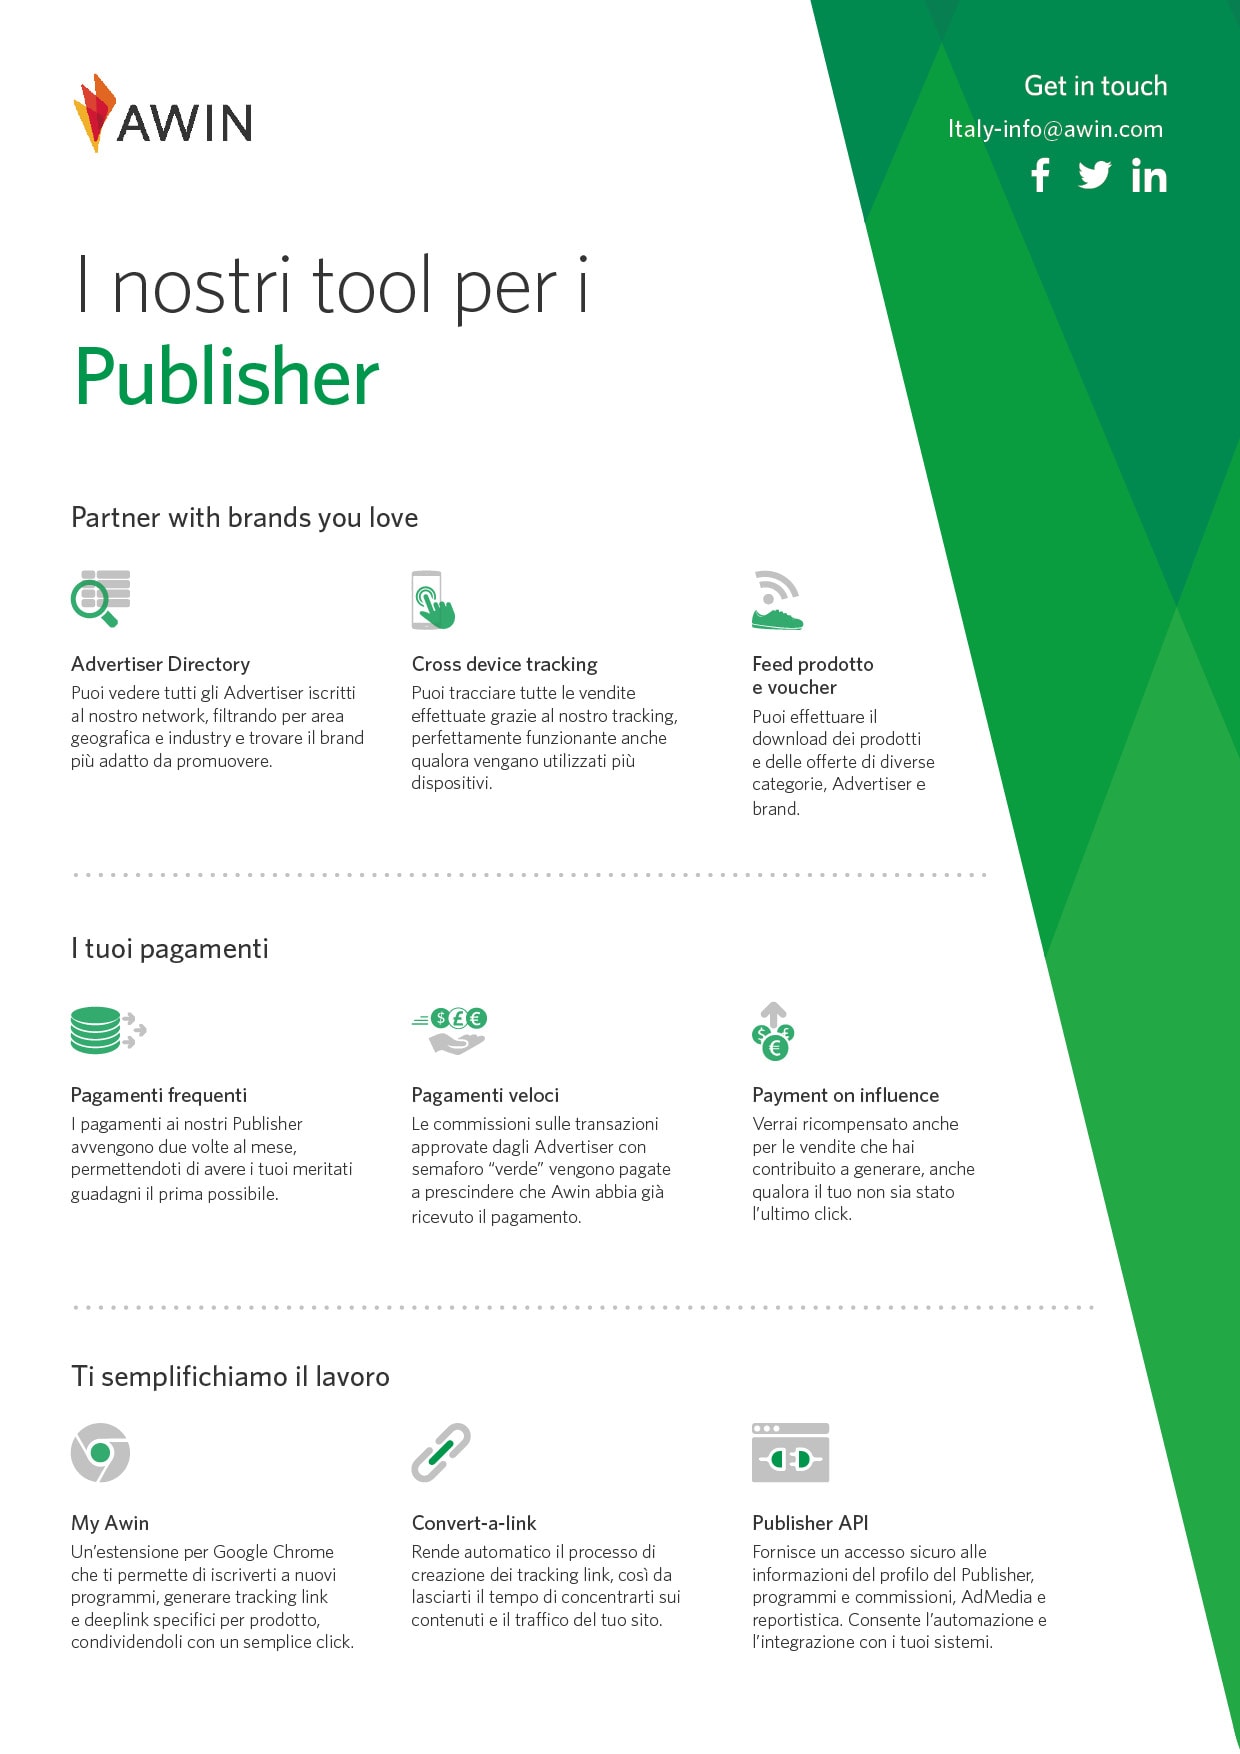 il nostro one pager tool per Publisher